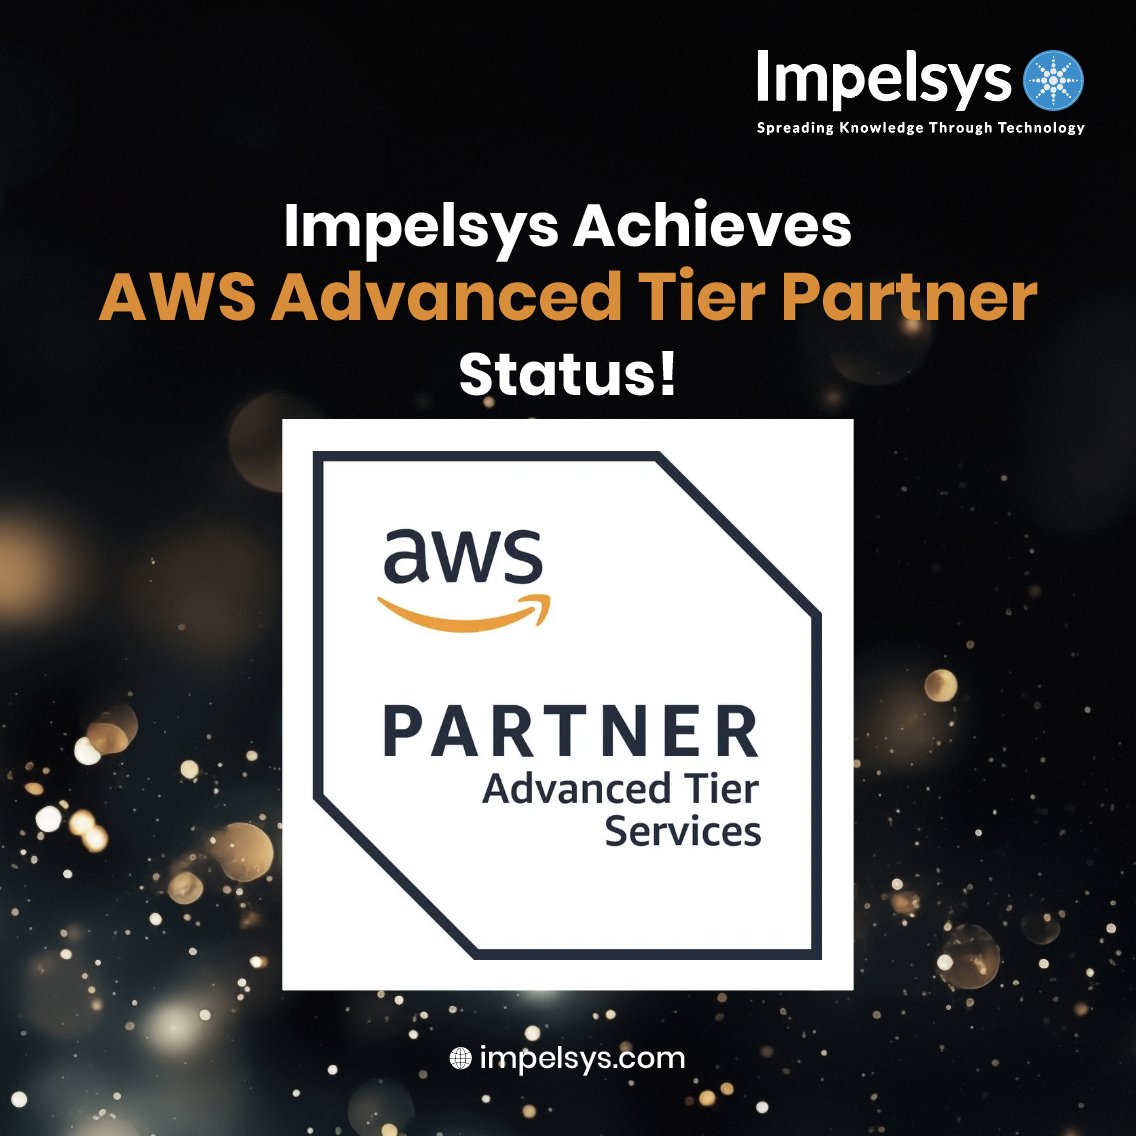 News Alert!
#Impelsys is absolutely thrilled to announce our elevation to #AWSAdvancedTierPartner Status!
Kudos to our cloud team led by Sripad K.B., and ably supported by Aayush Bhatt and Manoj Kumar M R for this remarkable achievement!

#AWSpartner #CloudServices #AWScloud